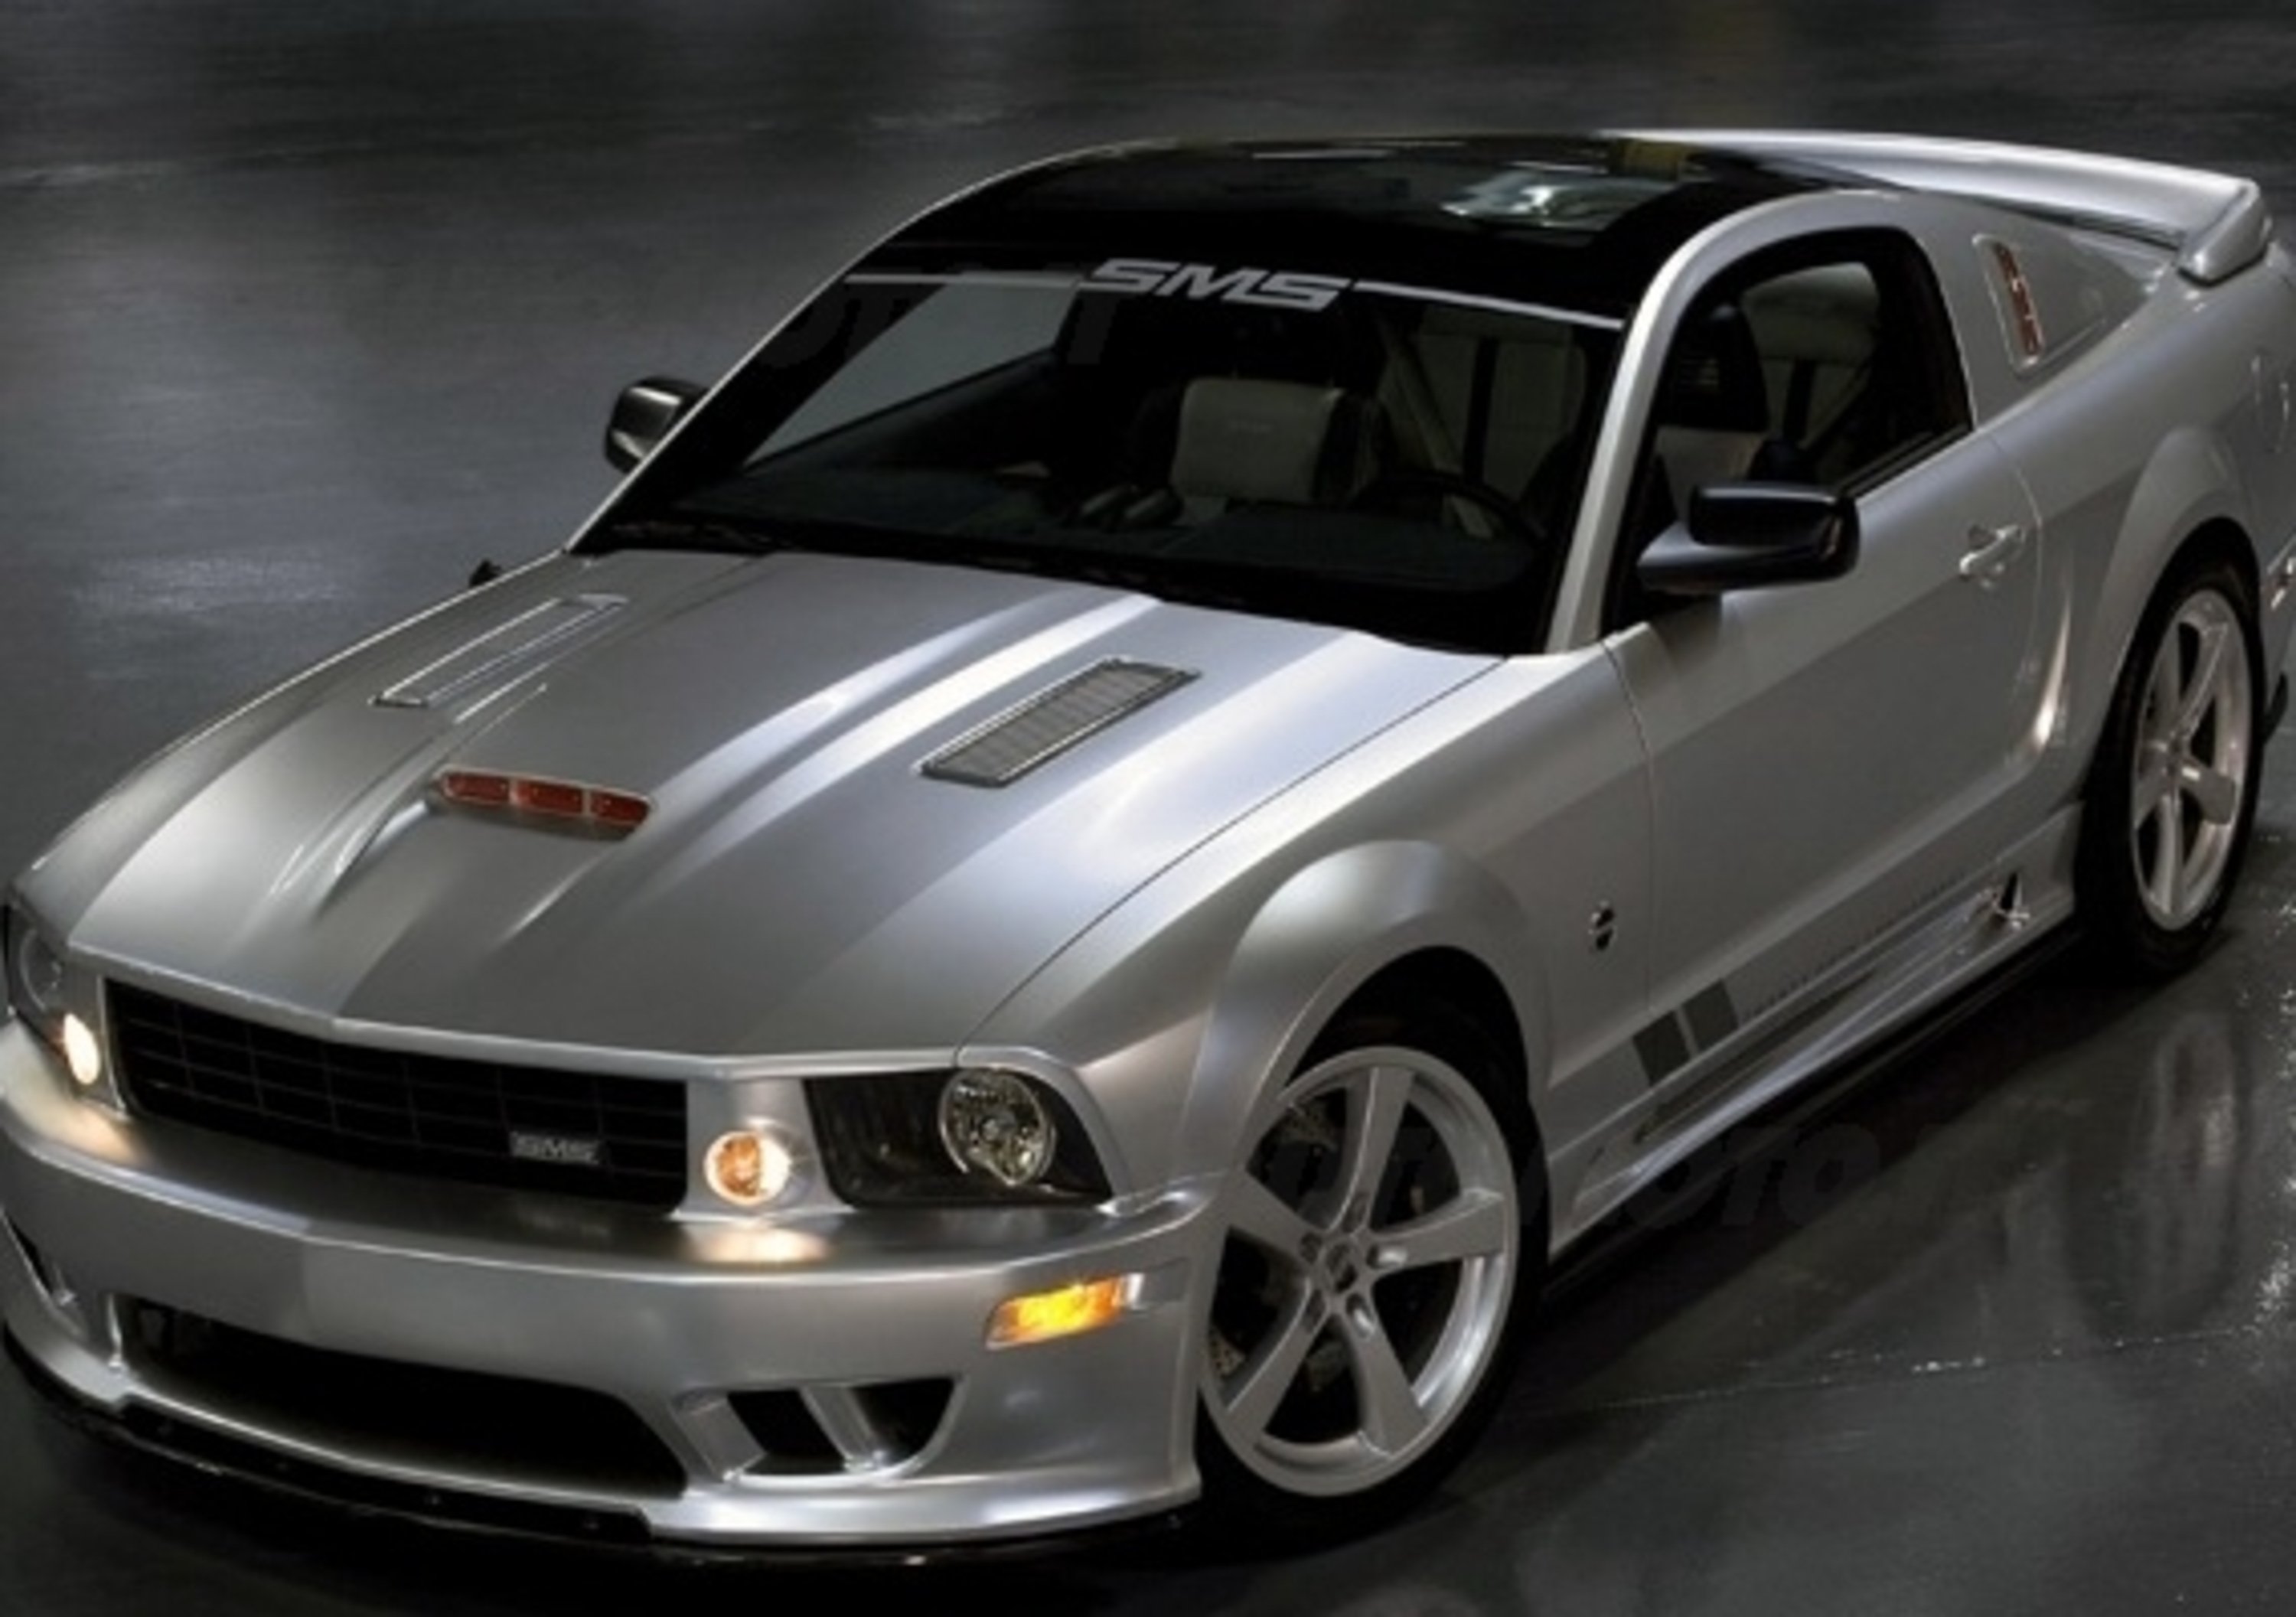 SMS 25th Anniversary Mustang Concept